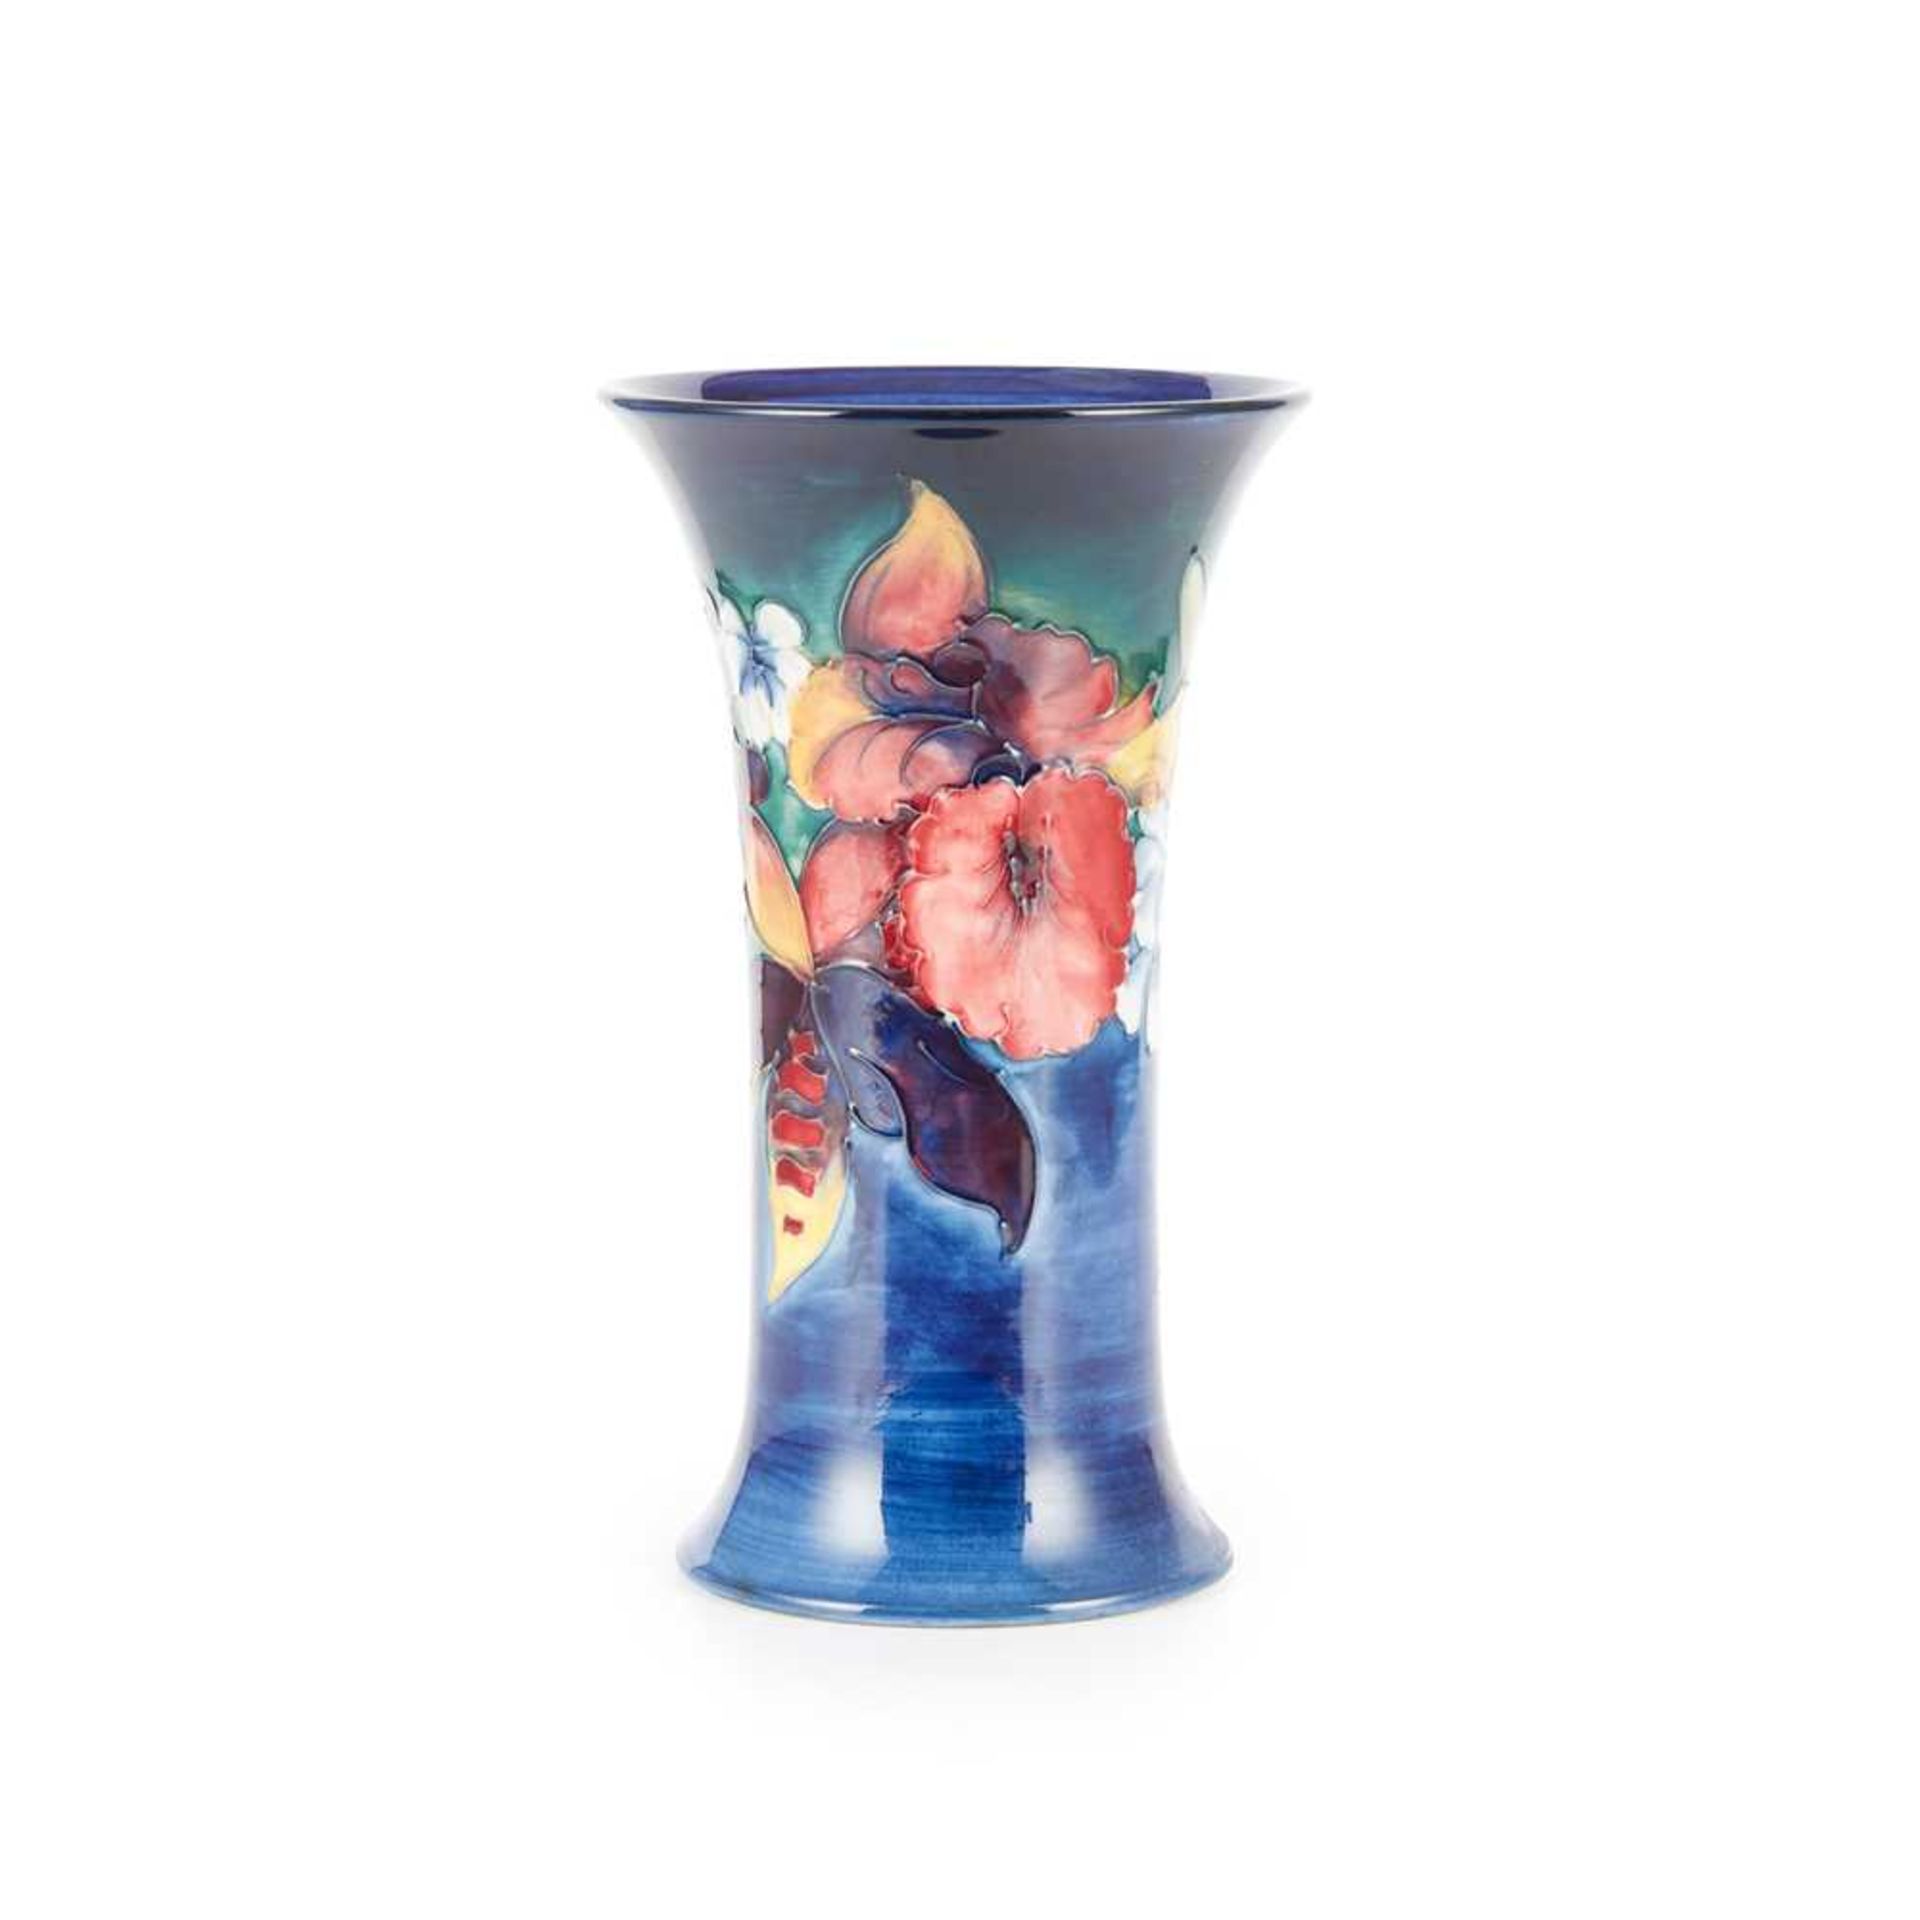 WILLIAM MOORCROFT (BRITISH 1872-1945) FOR MOORCROFT POTTERY 'ORCHID AND SPRING FLOWERS' VASE, CIR - Image 2 of 4